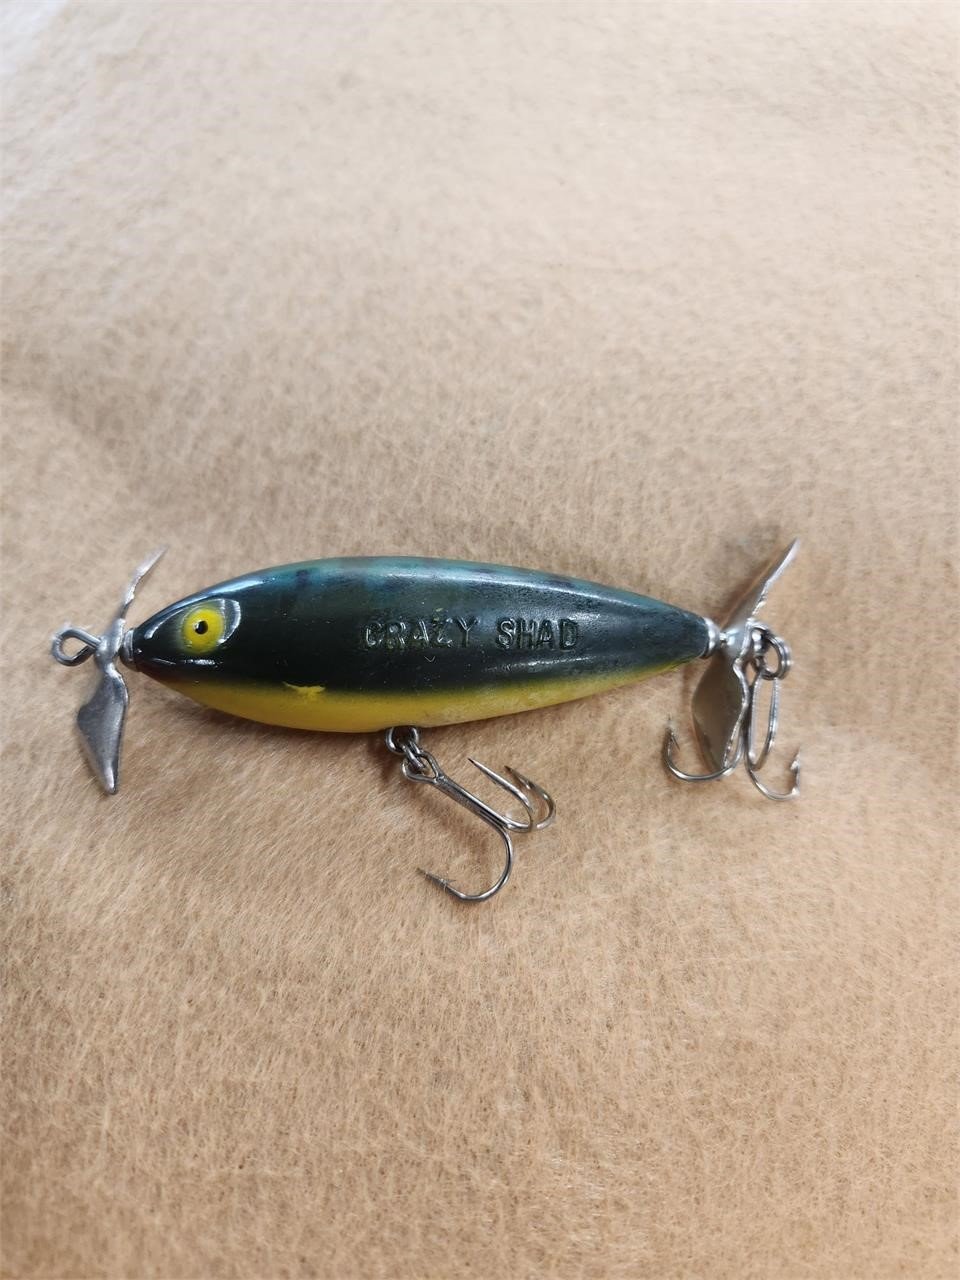 Antique fishing lure, crazy shad